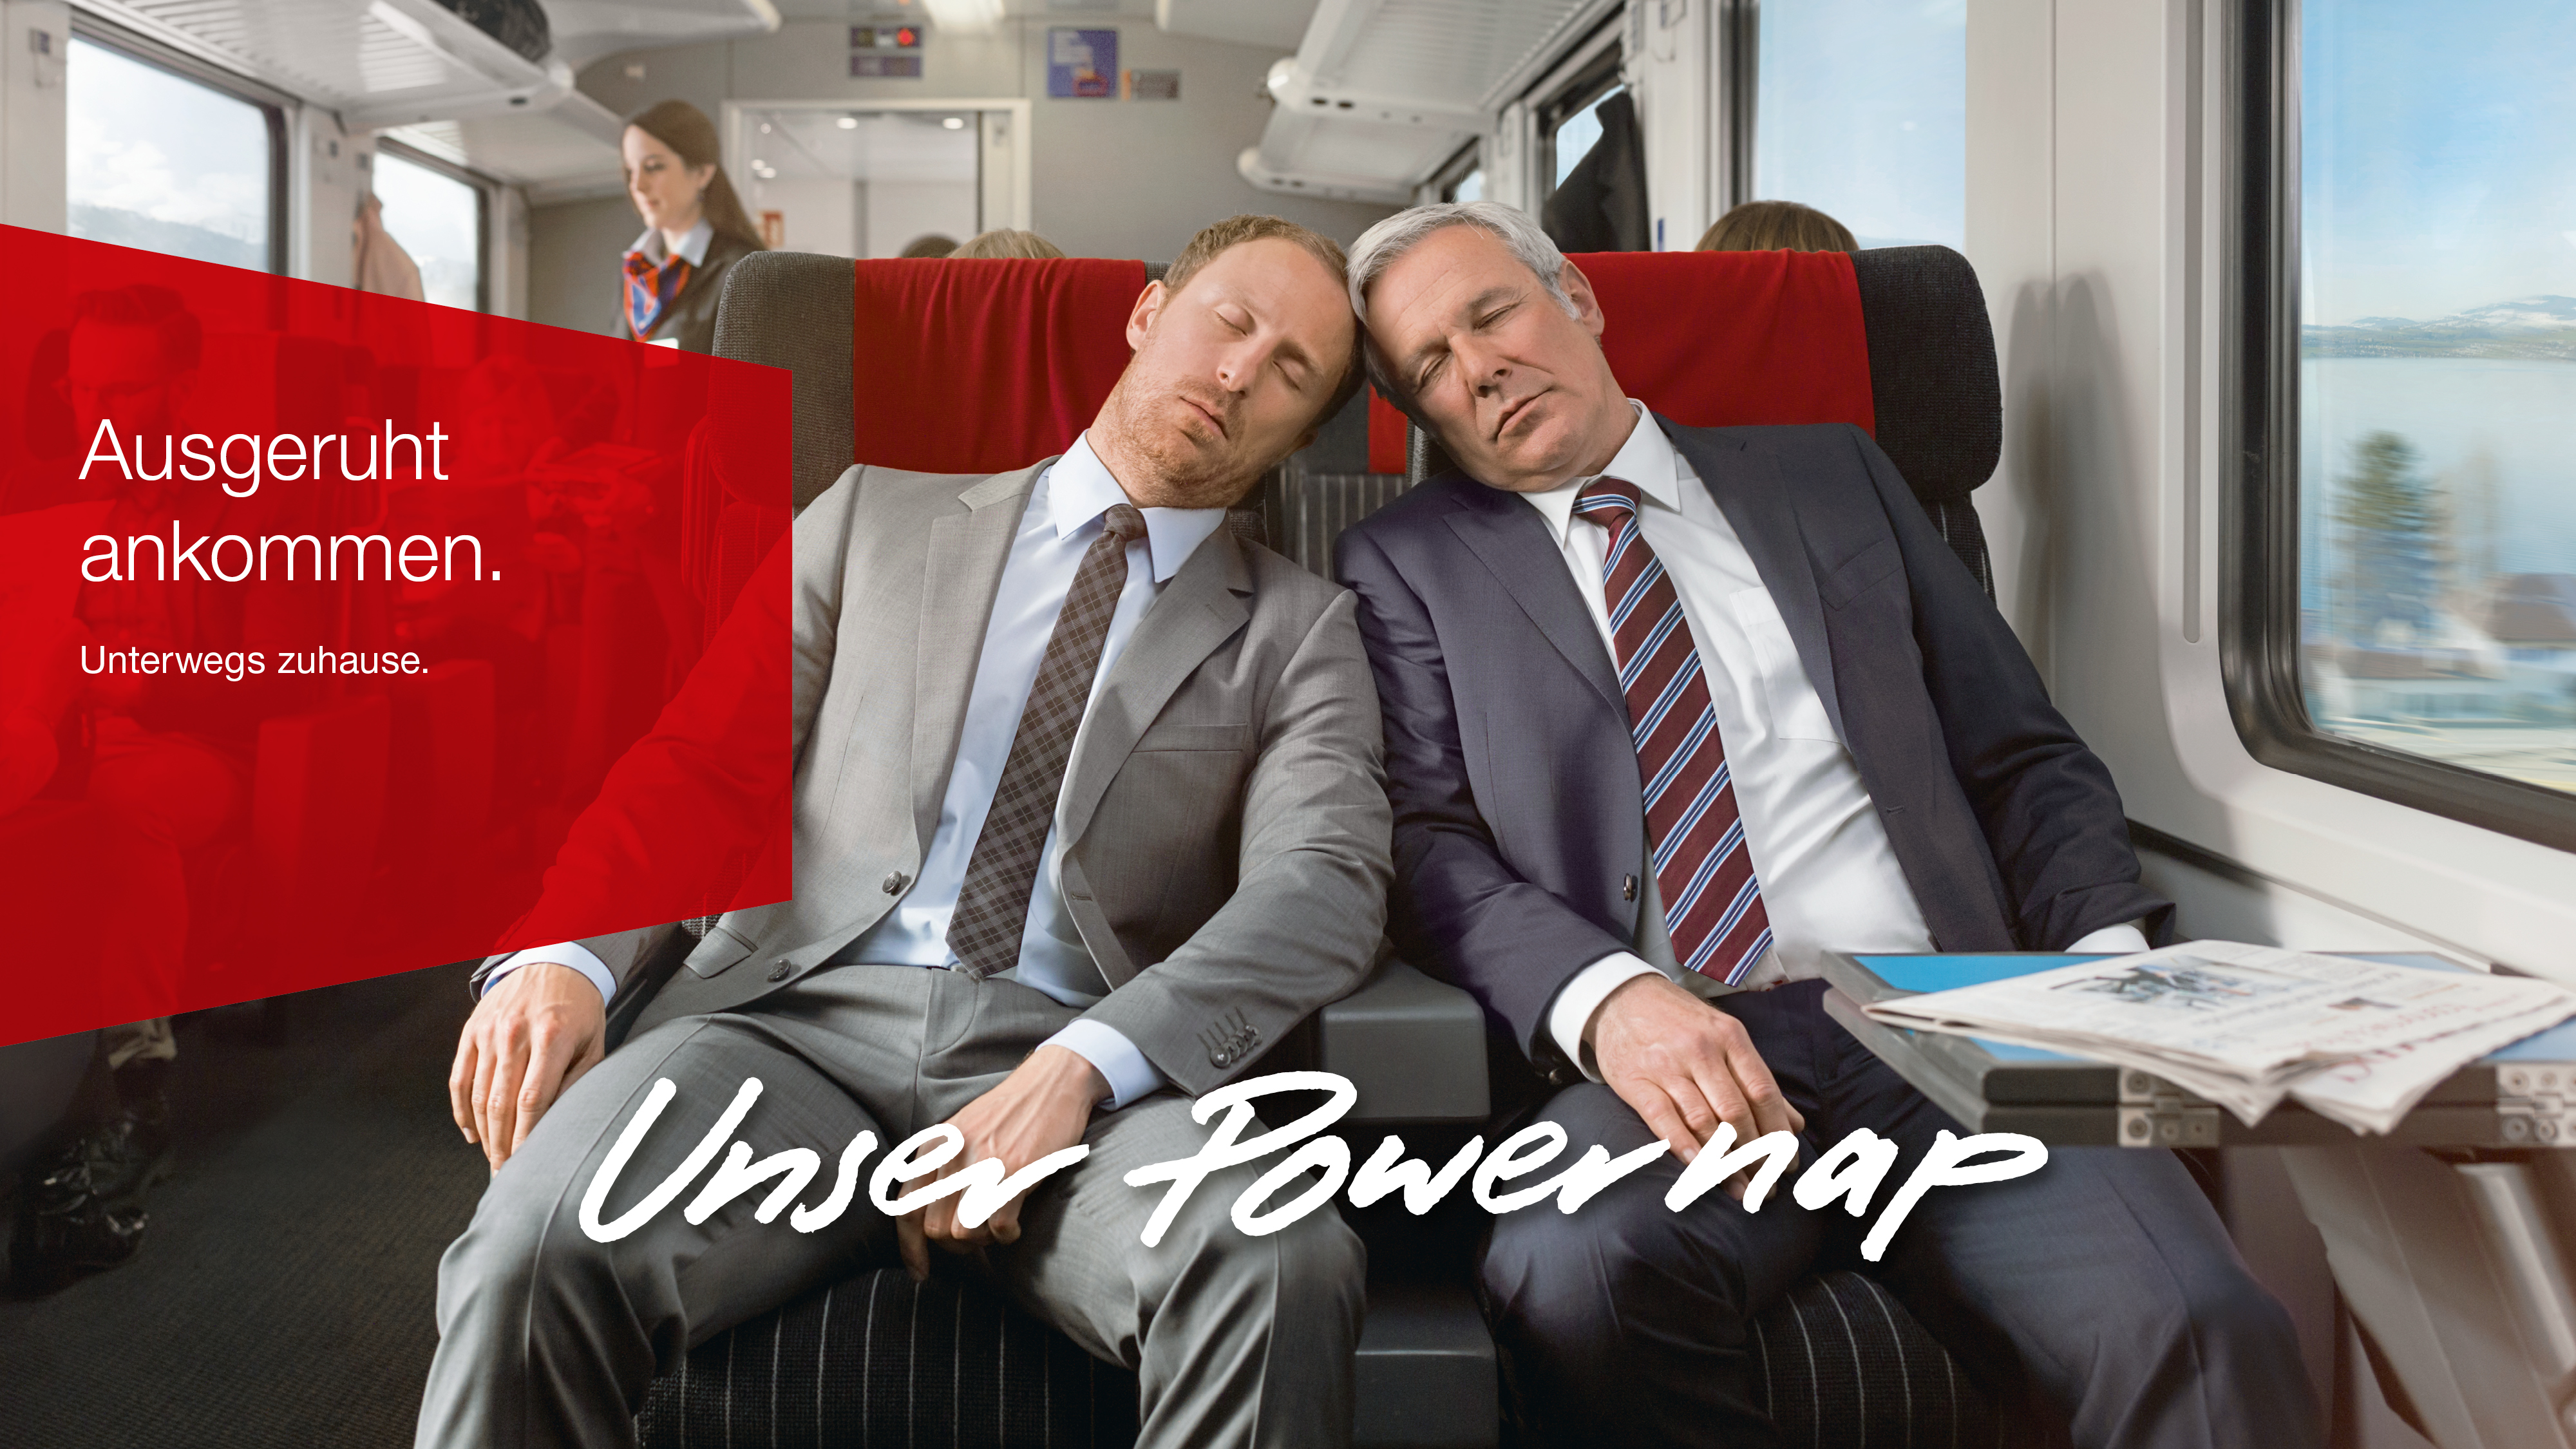 Two men in suits sleeping on the train